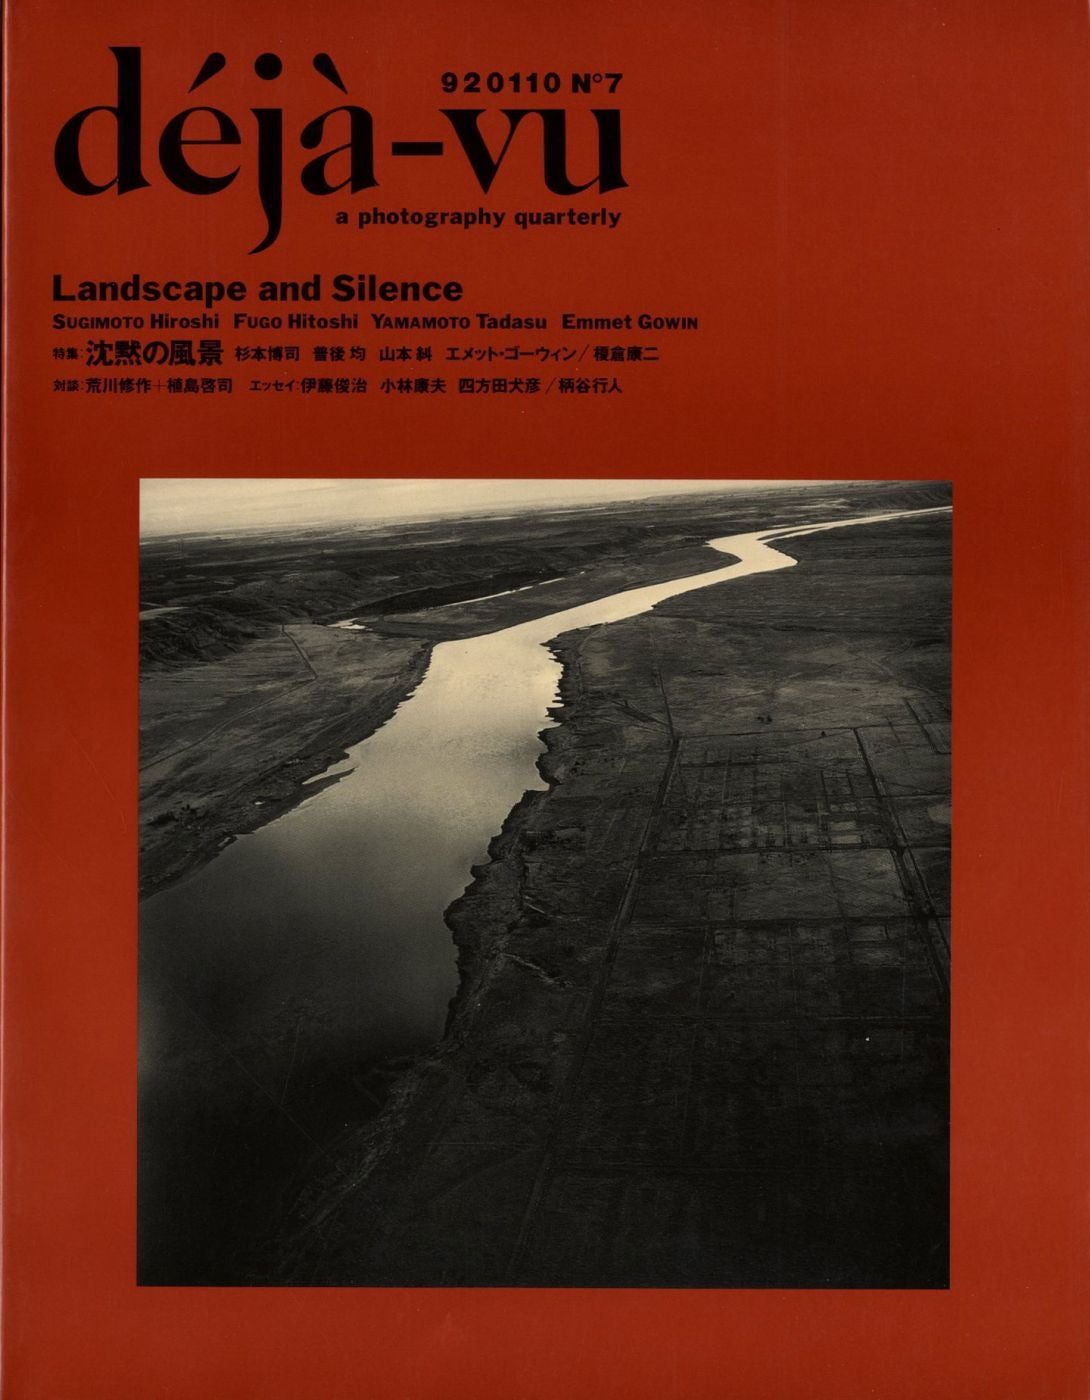 Hiroshi Sugimoto: A Near Complete Collection of 45 Books and